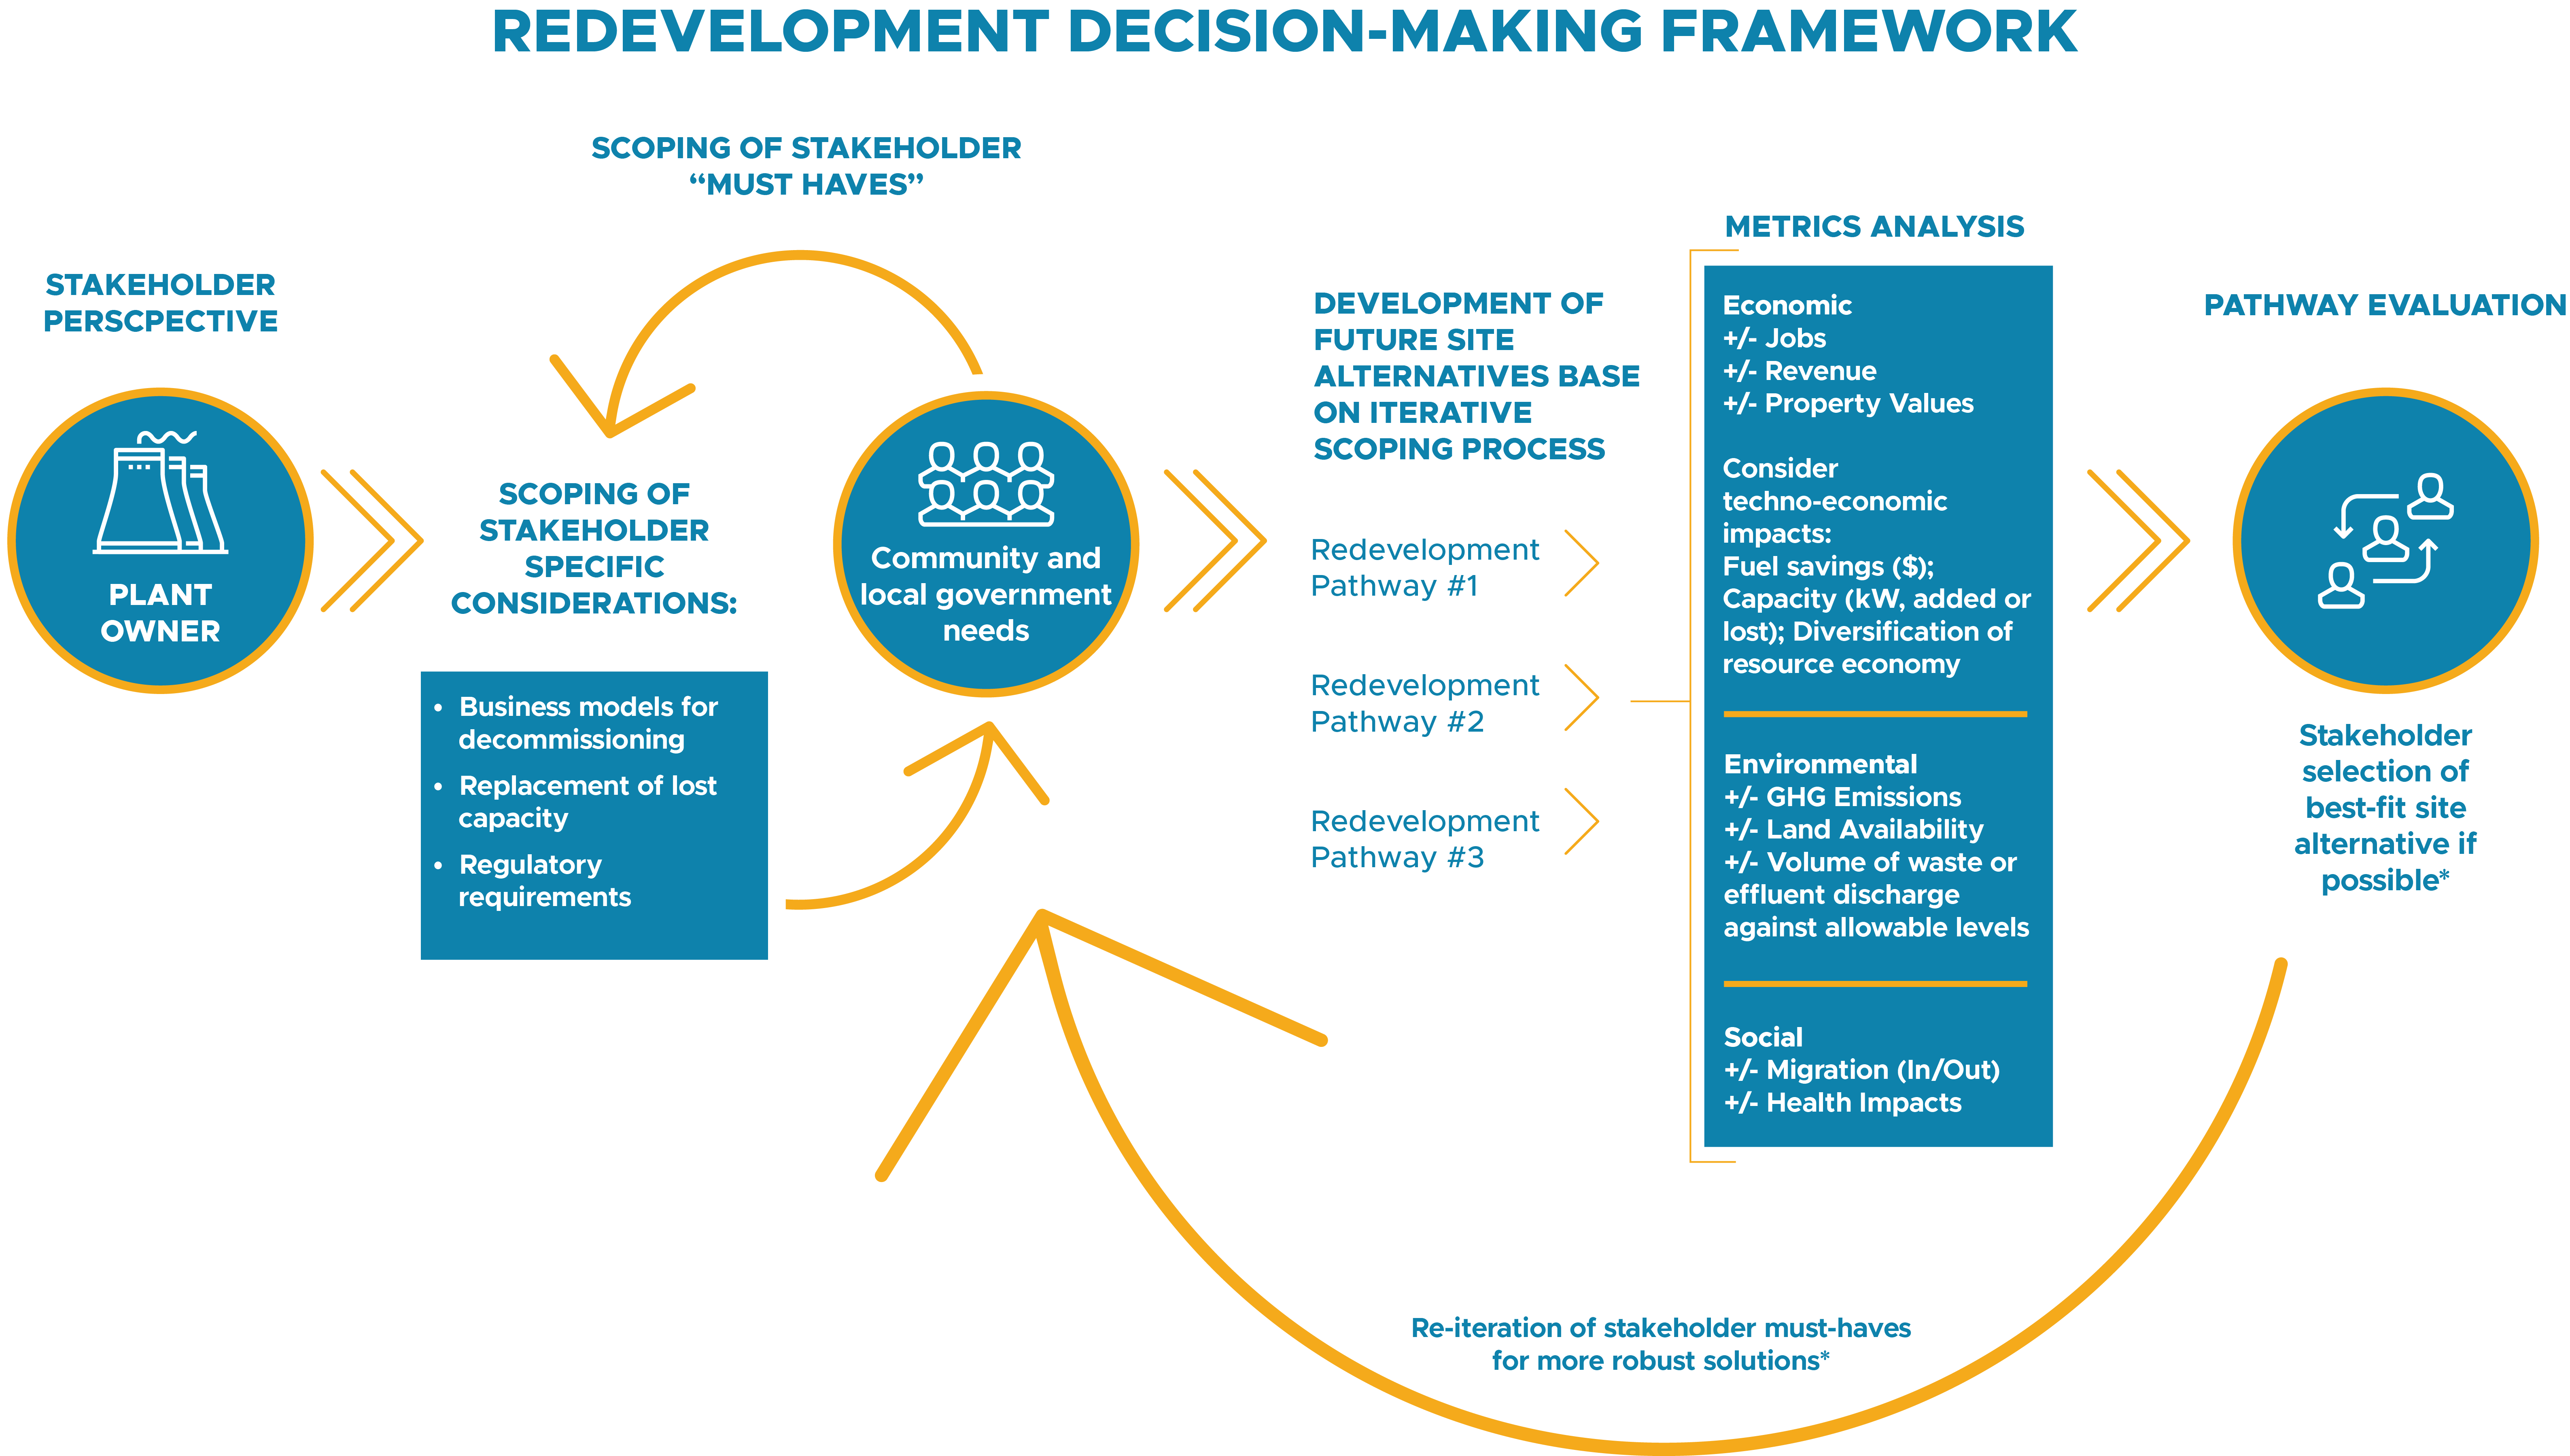 Graphic displaying a redevelopment decision-making framework. Beginning with the stakeholder perspective of a plant owner, it transitions to scoping stakeholder "must haves" while considering community and local govt. needs. It then makes its way through metrics analysis and pathway evaluation to determine the stakeholder selection of best-fit site alternative (if possible,) which can lead back to scoping stakeholder "must haves."